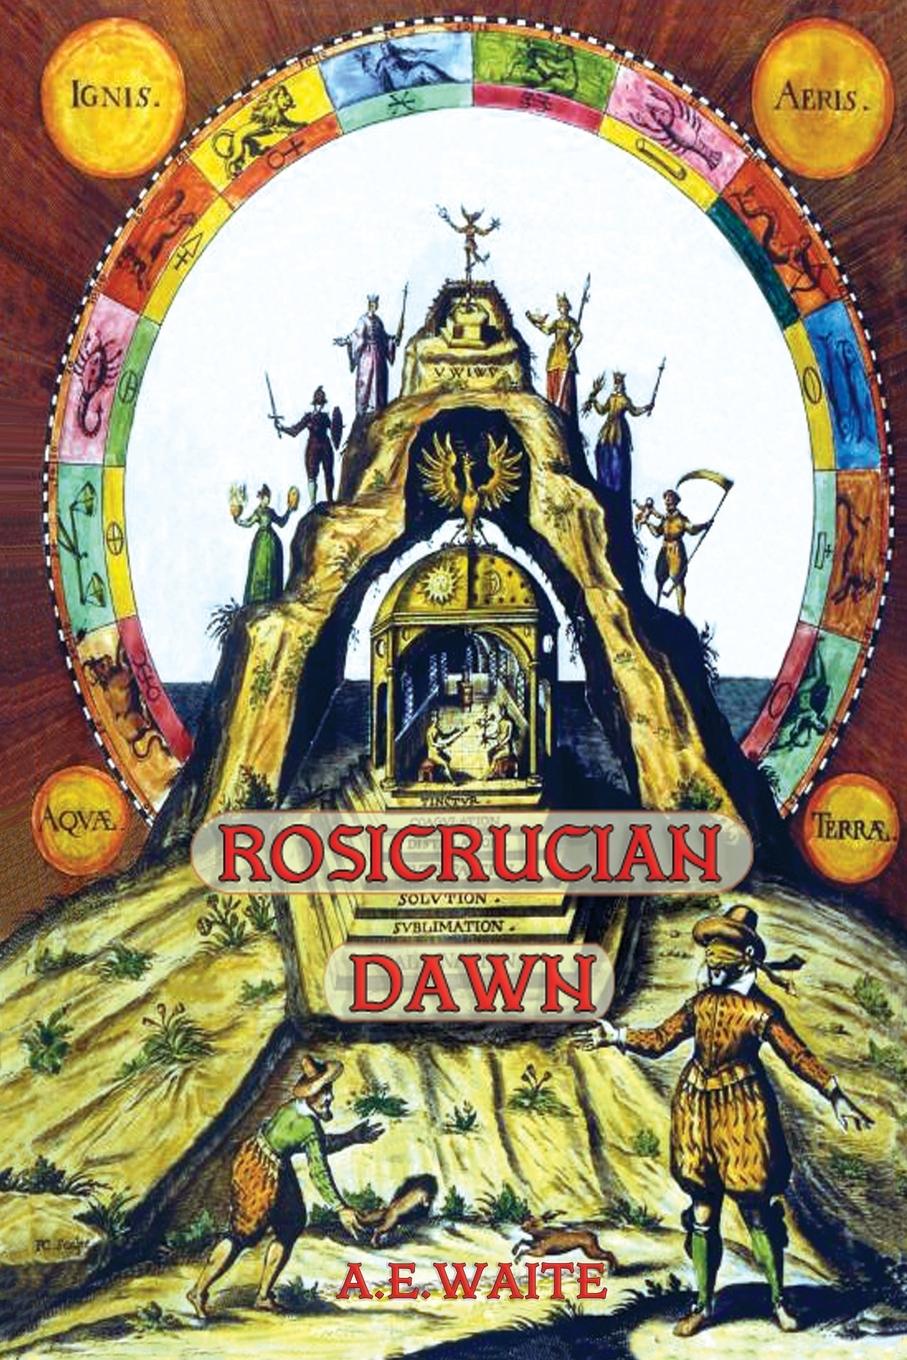 Book Rosicrucian Dawn - the three foundational texts that announced the Rosicrucian Fraternity 